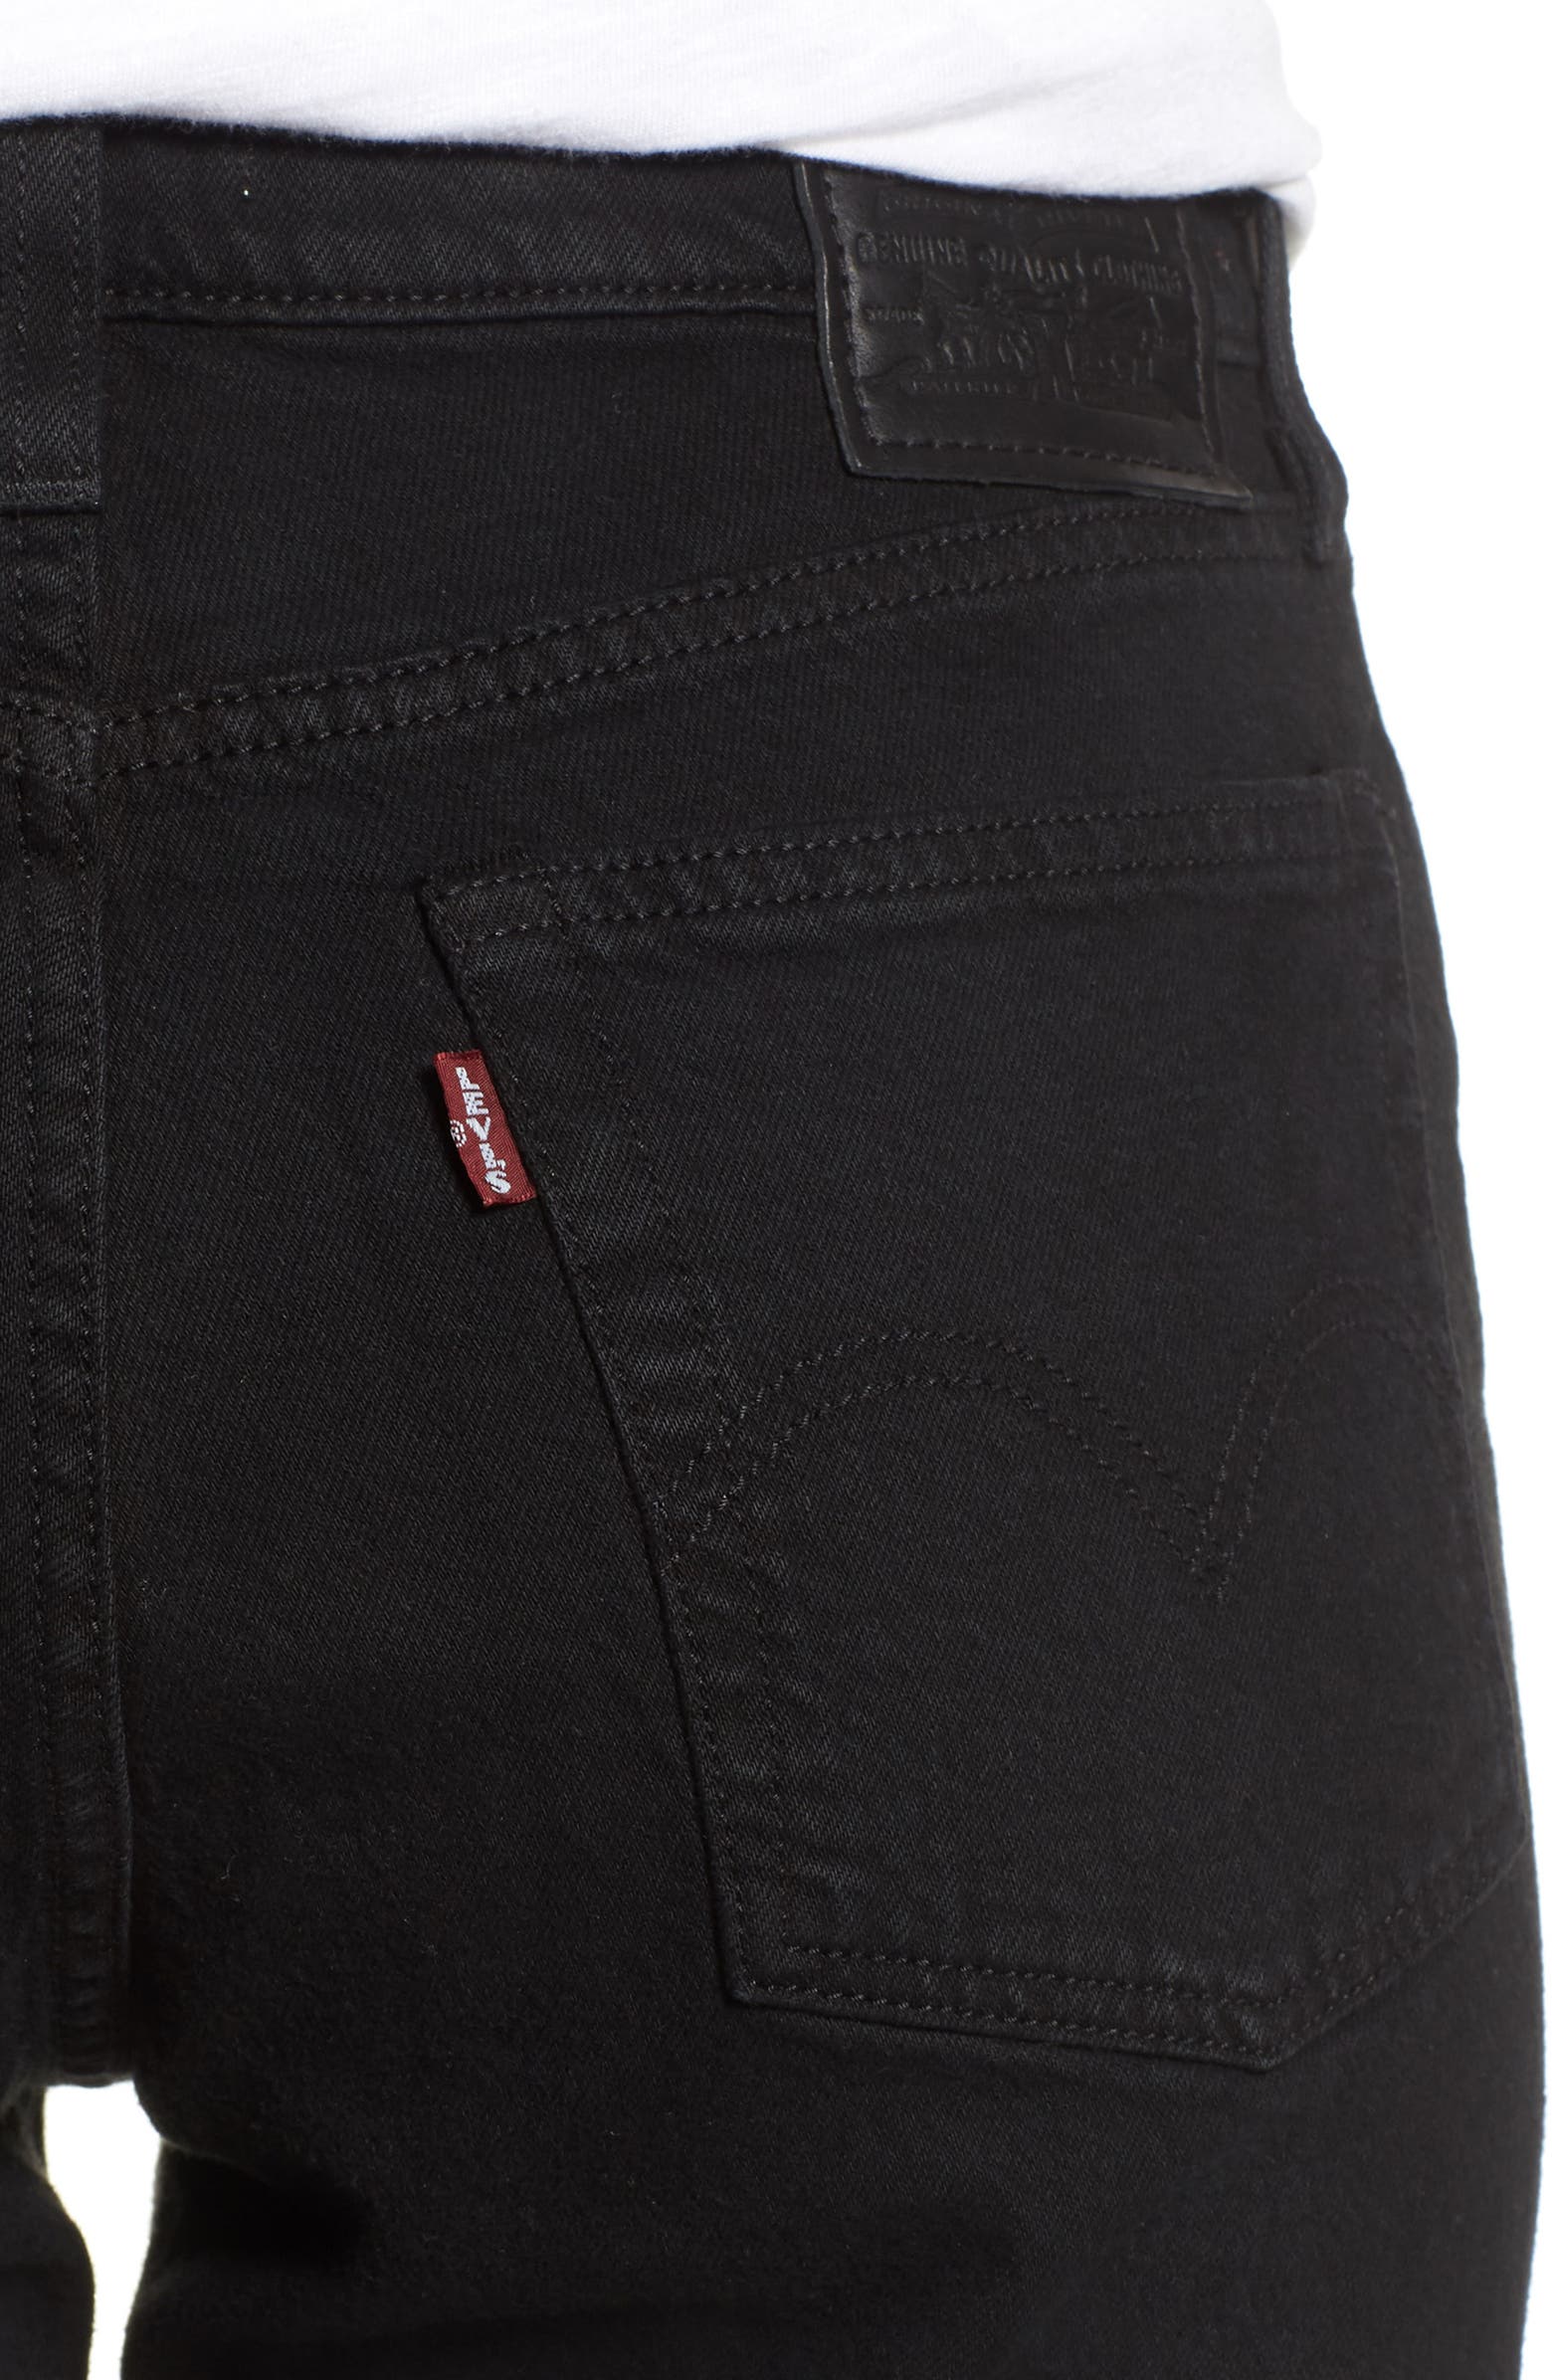 Levi's® Wedgie High Waist Straight Jeans | Nordstrom